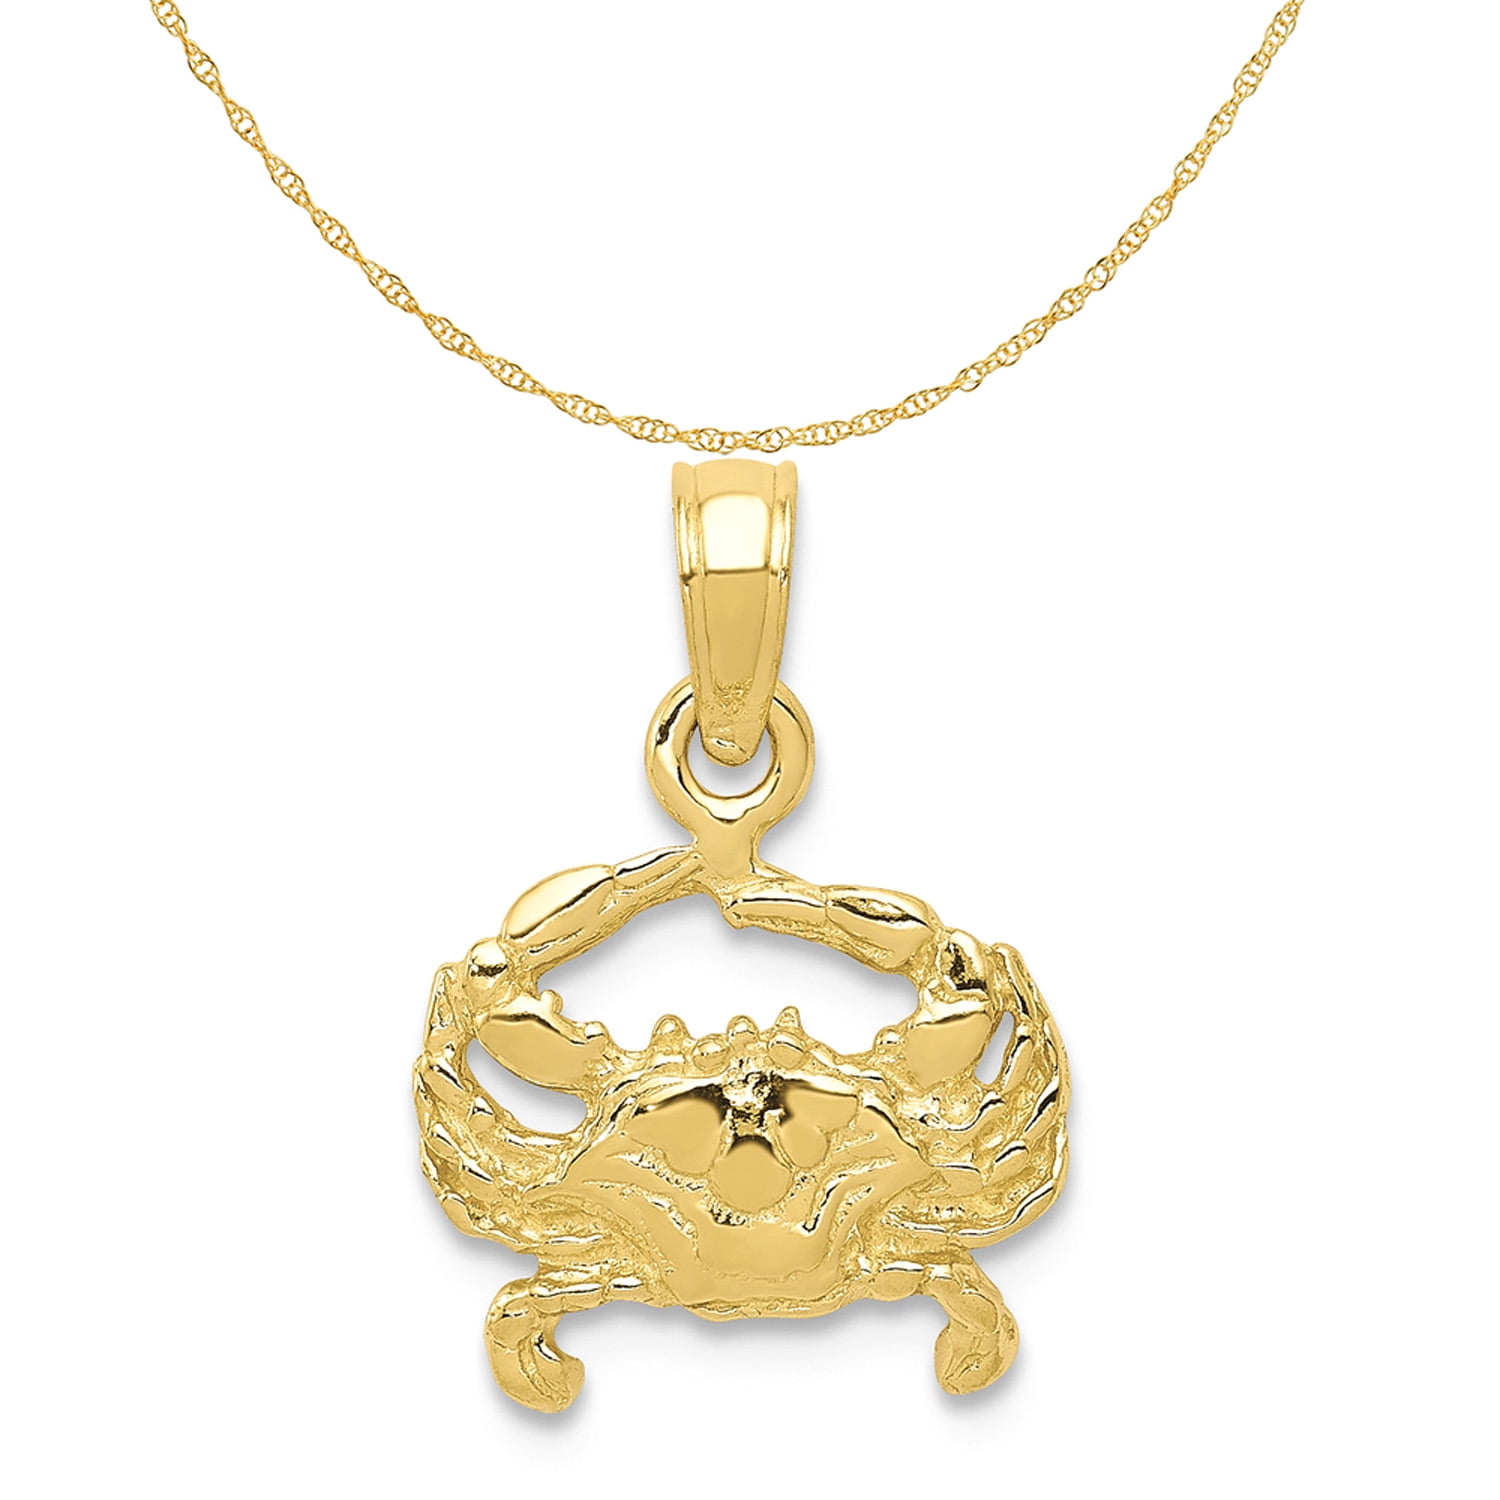 Gold-Filled Embellished Crab Necklace | Midori Jewelry Co.